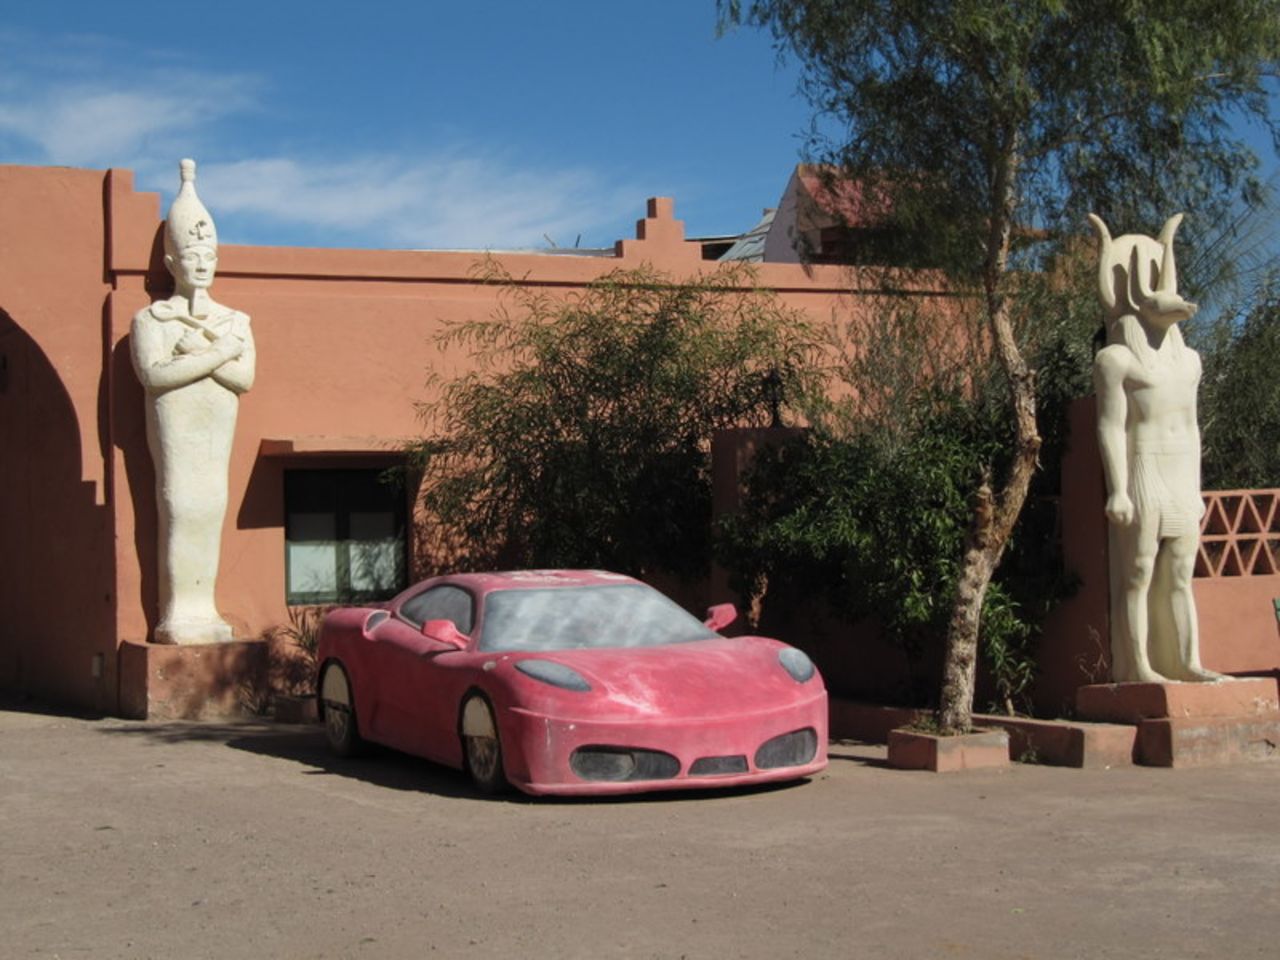 Studios in Ouarzazate offer filmmakers dozens of set options and props, from Styrofoam Egyptian temples to colorful cars. Some studios even have horses for hire.